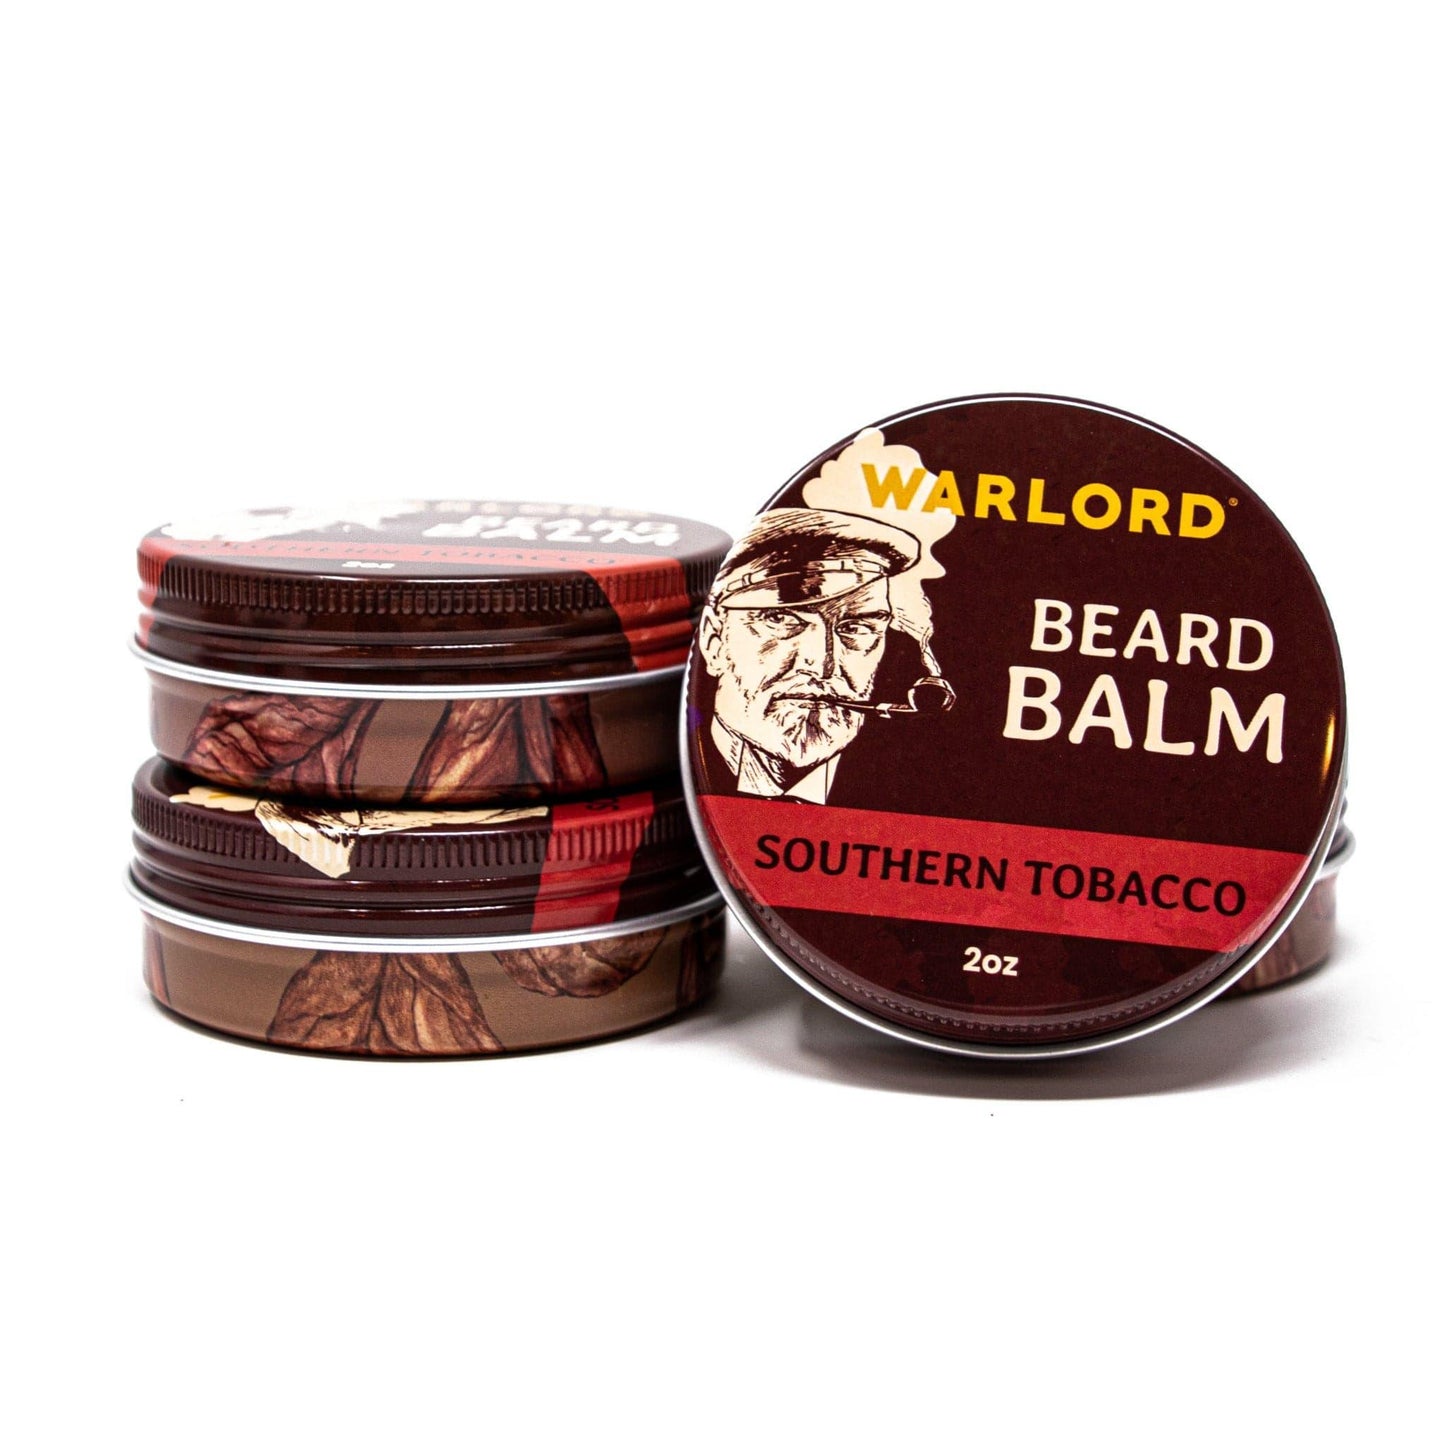 Southern Tobacco Beard Balm - Warlord - Men's Grooming Essentials